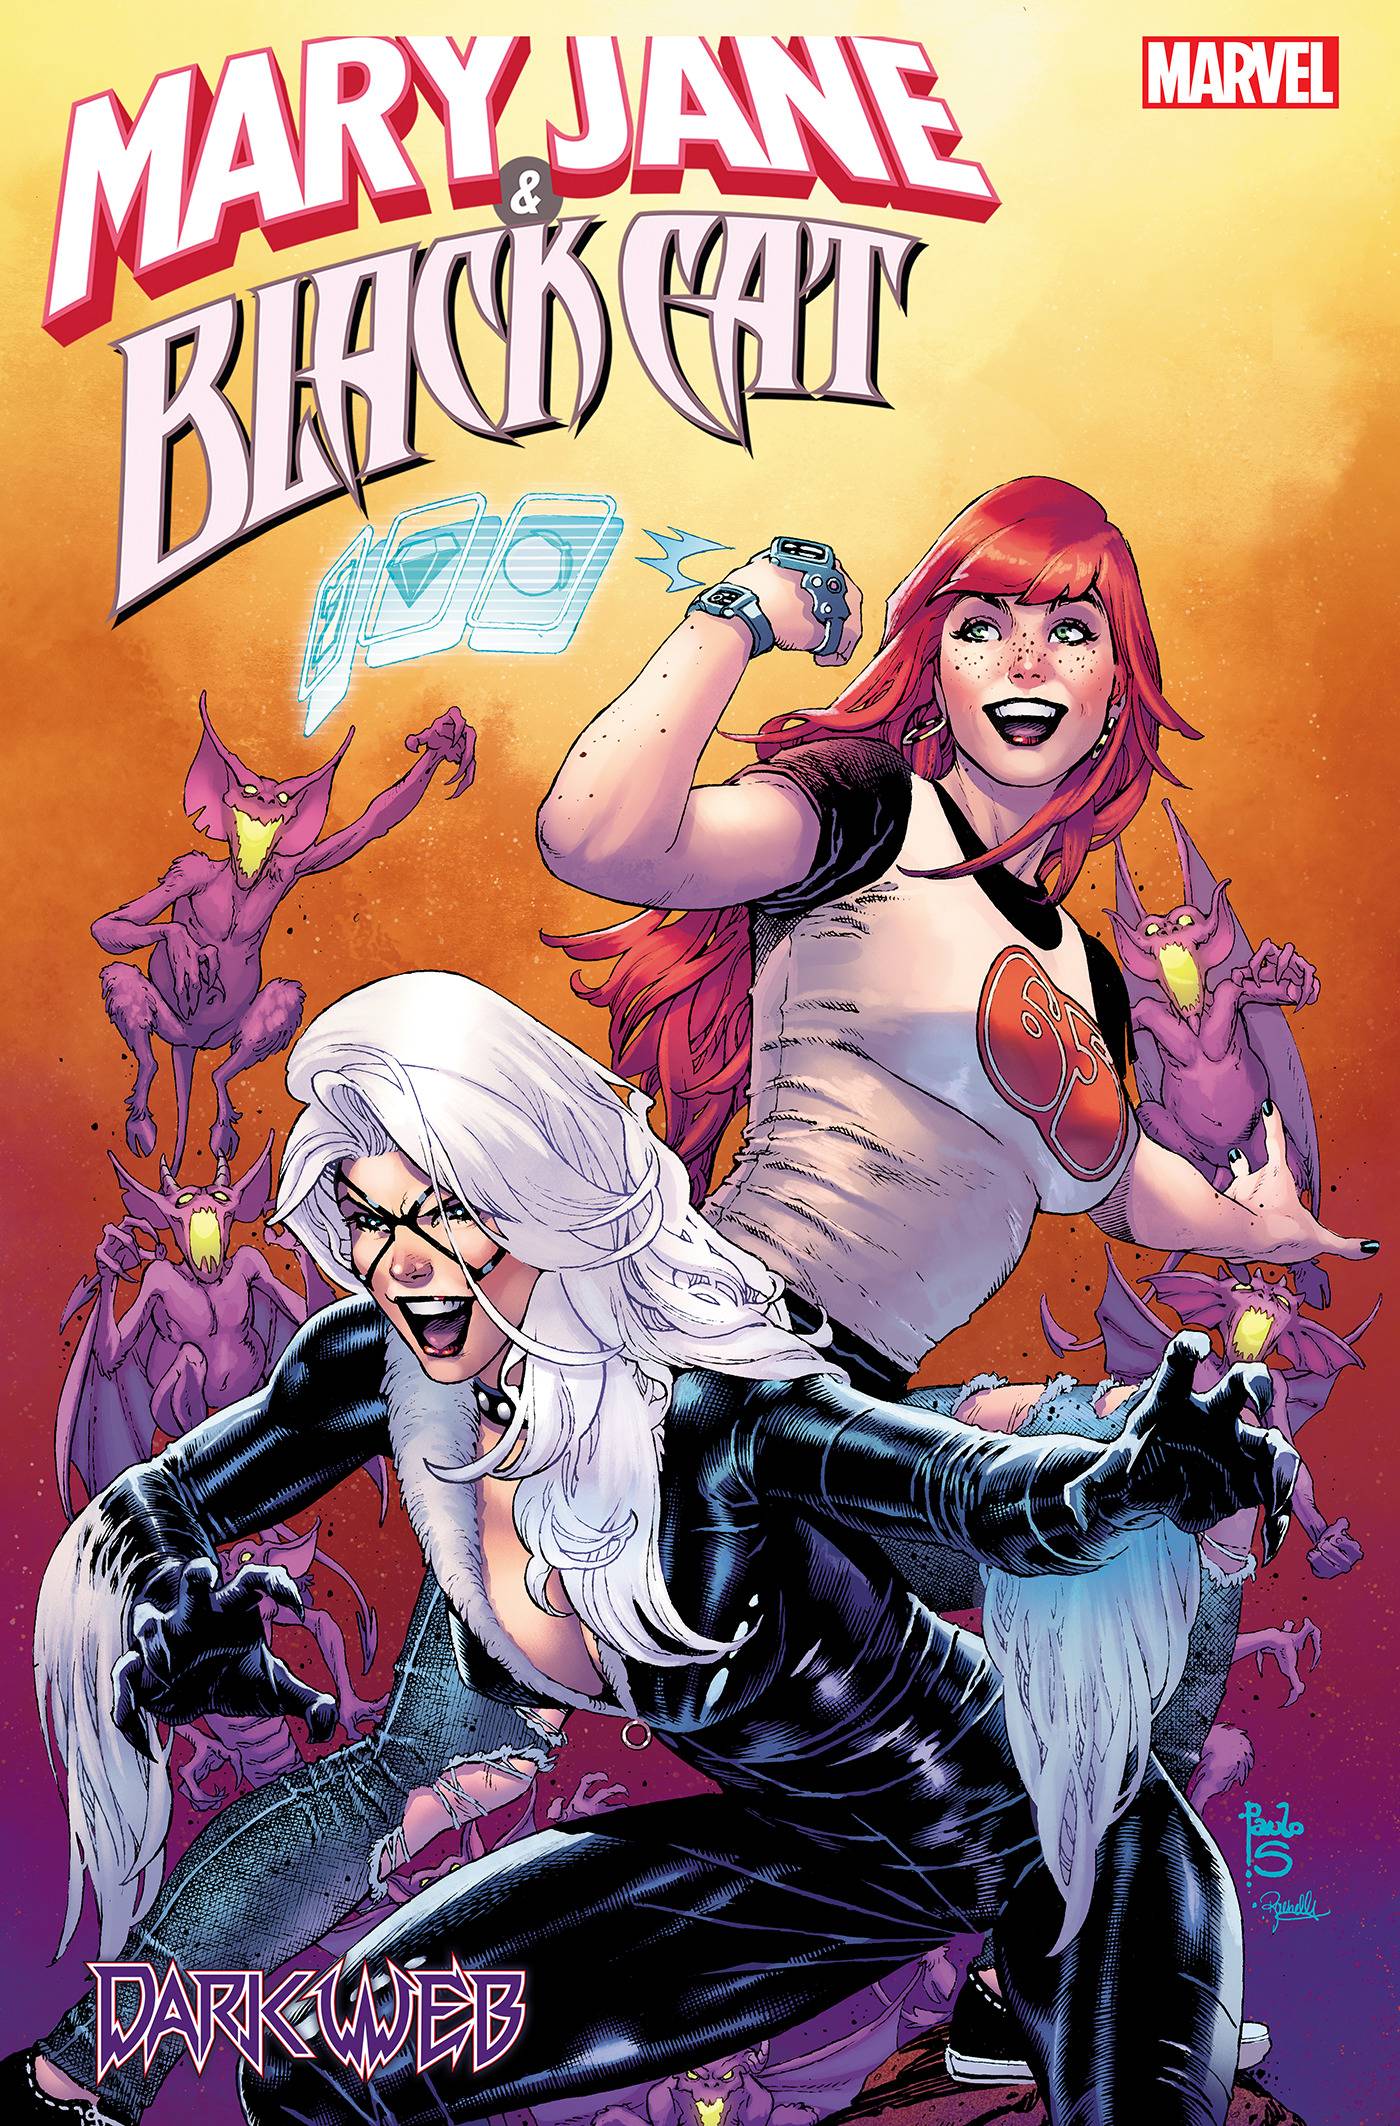 12/21/2022 MARY JANE AND BLACK CAT #1 (OF 5) 1:50 SIQUEIRA VARIANT